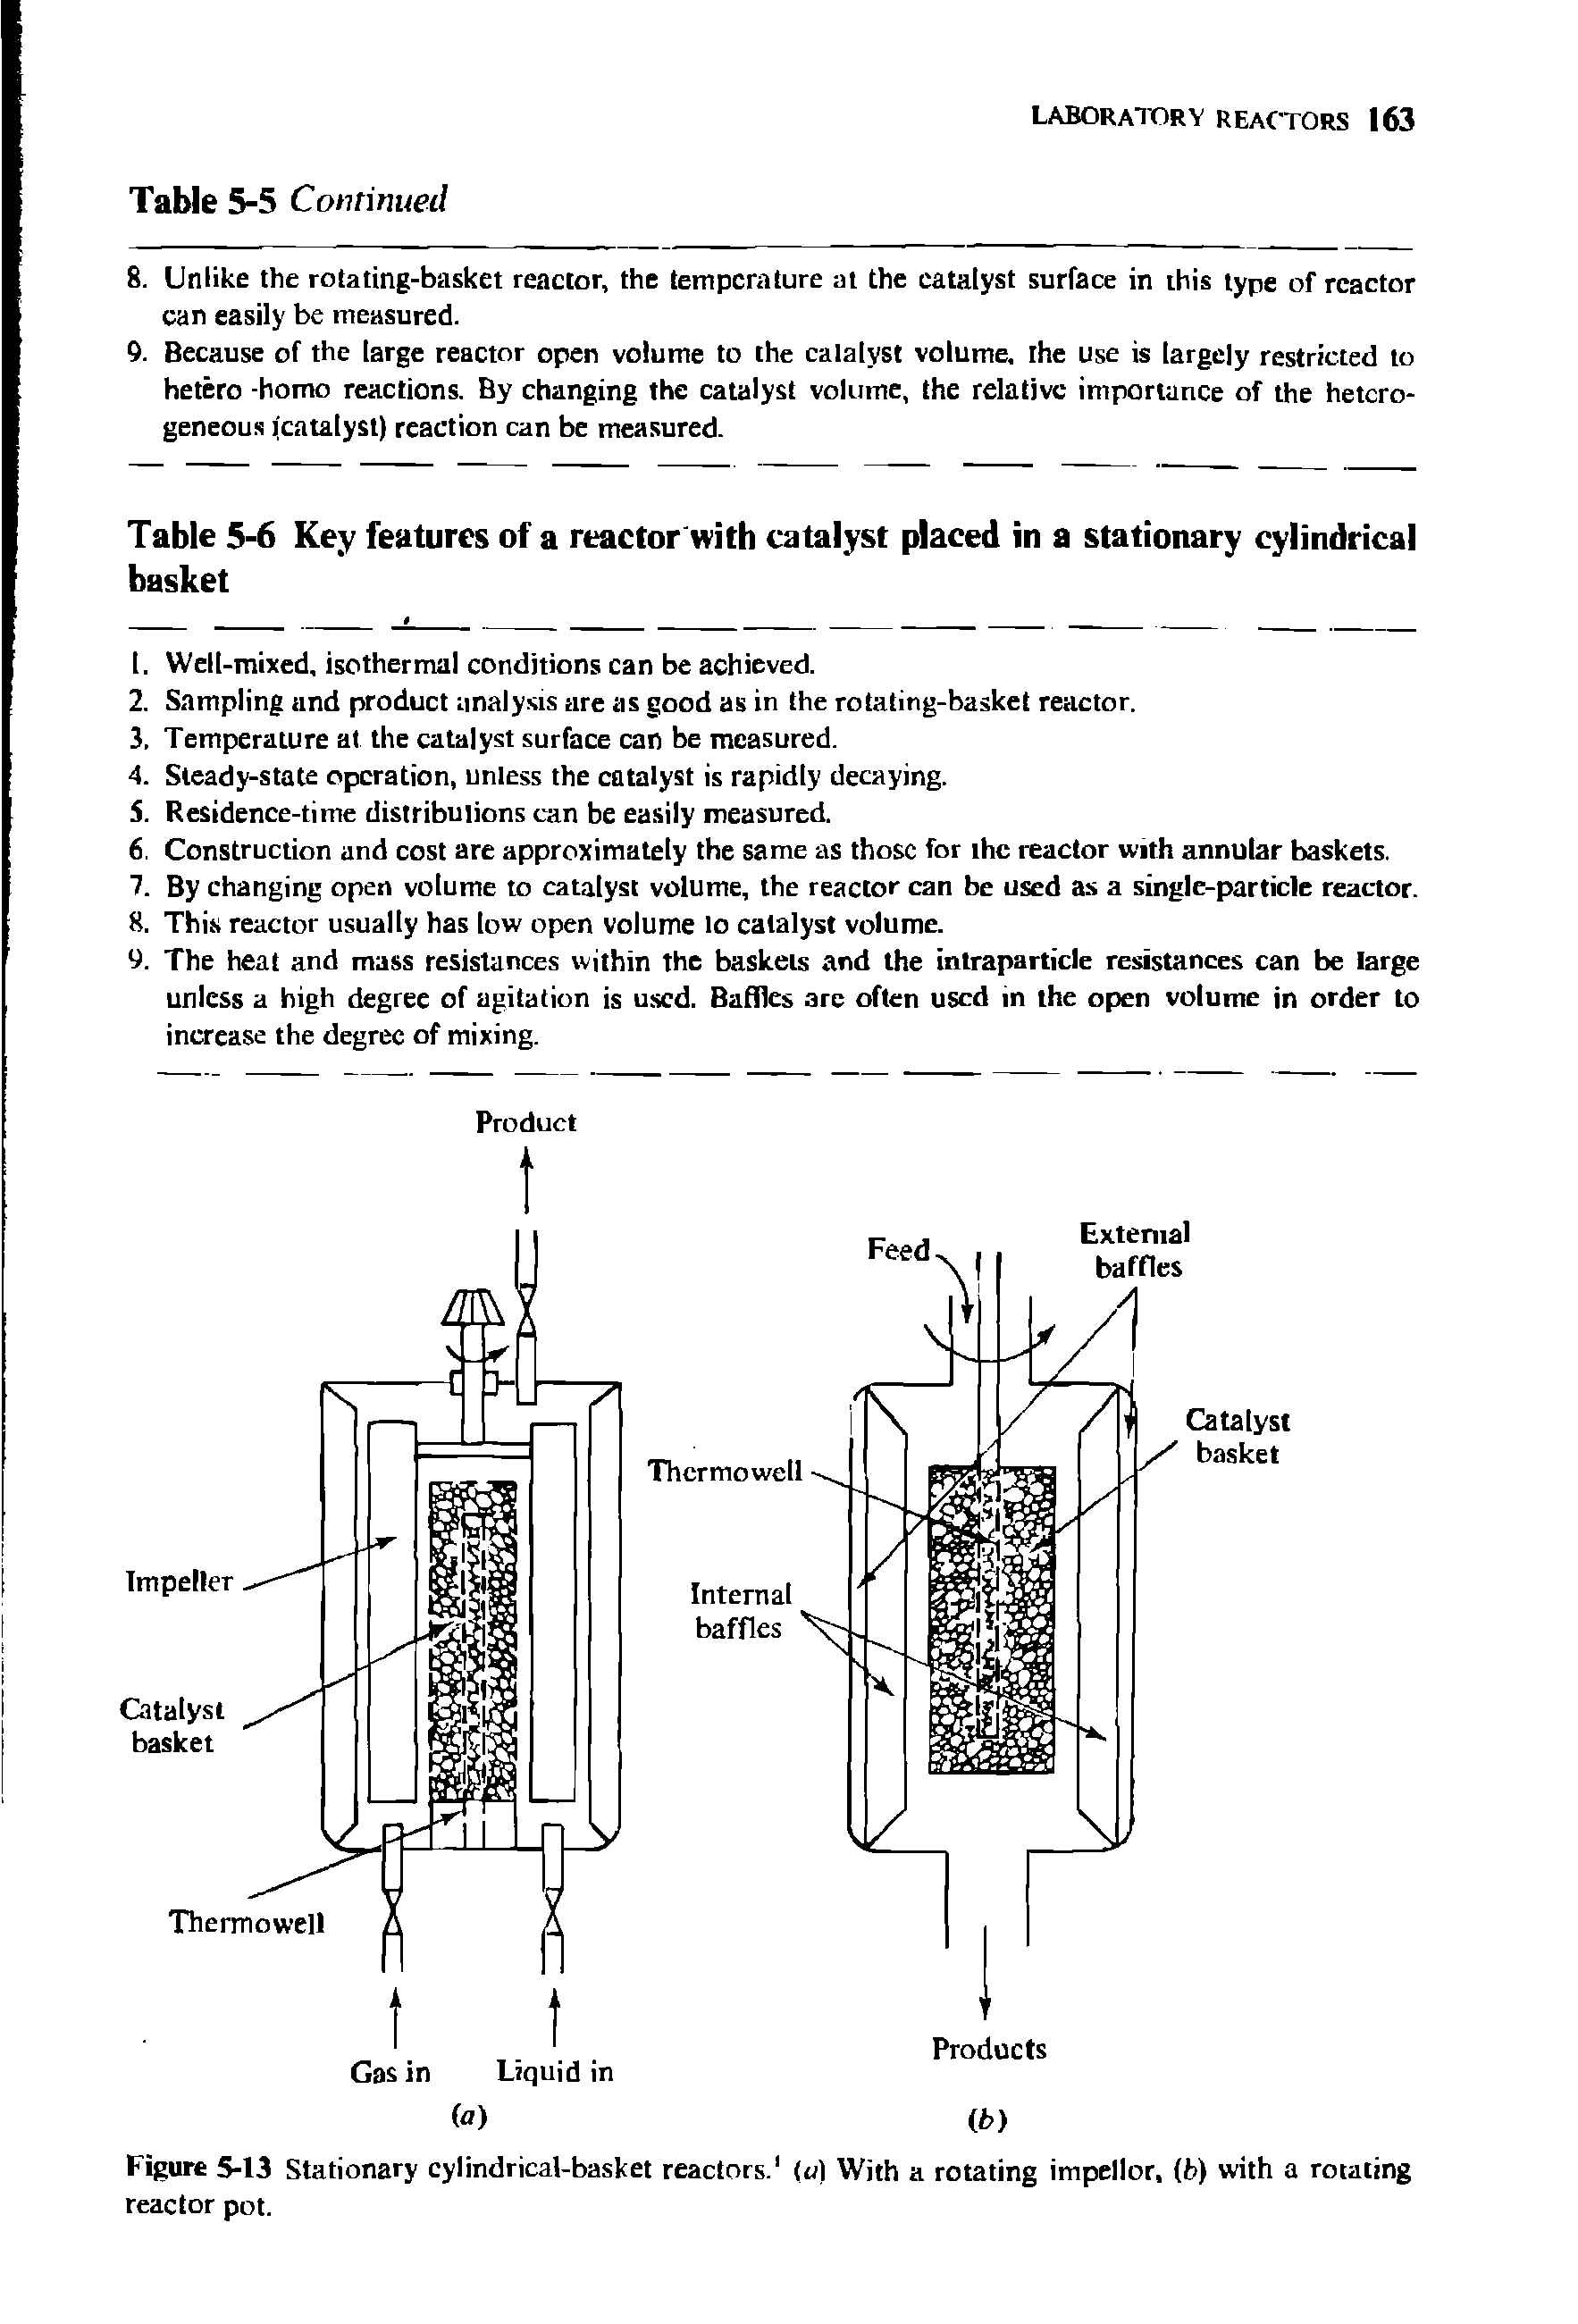 Figure 5-13 Stationary cylindrical-basket reactors. (u) With a rotating impeller, (fc) with a rotating reactor pot.